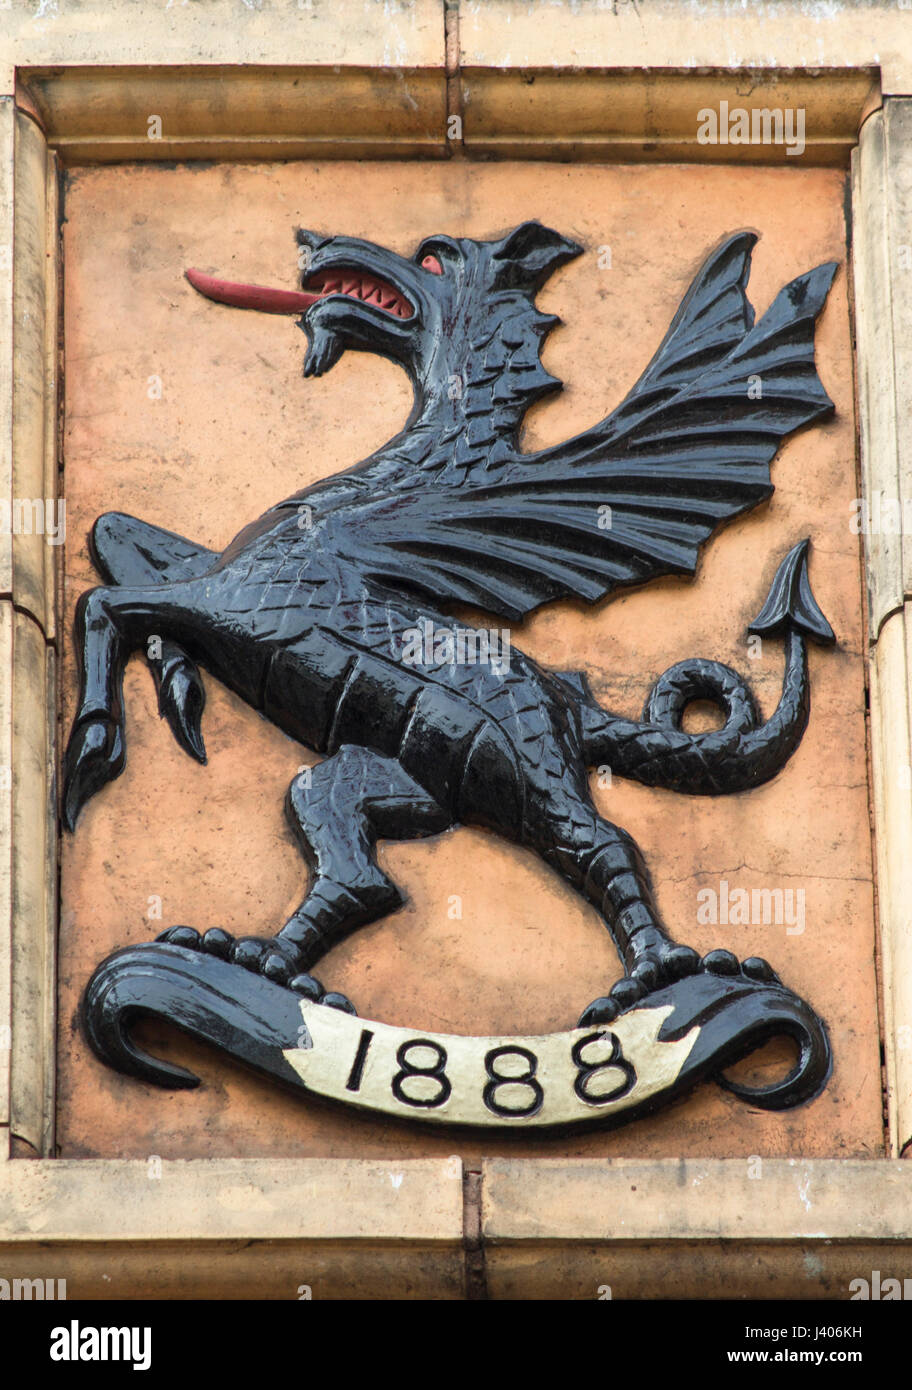 Black Griffin with red tongue and red eyes mounted on a stone plaque Stock Photo